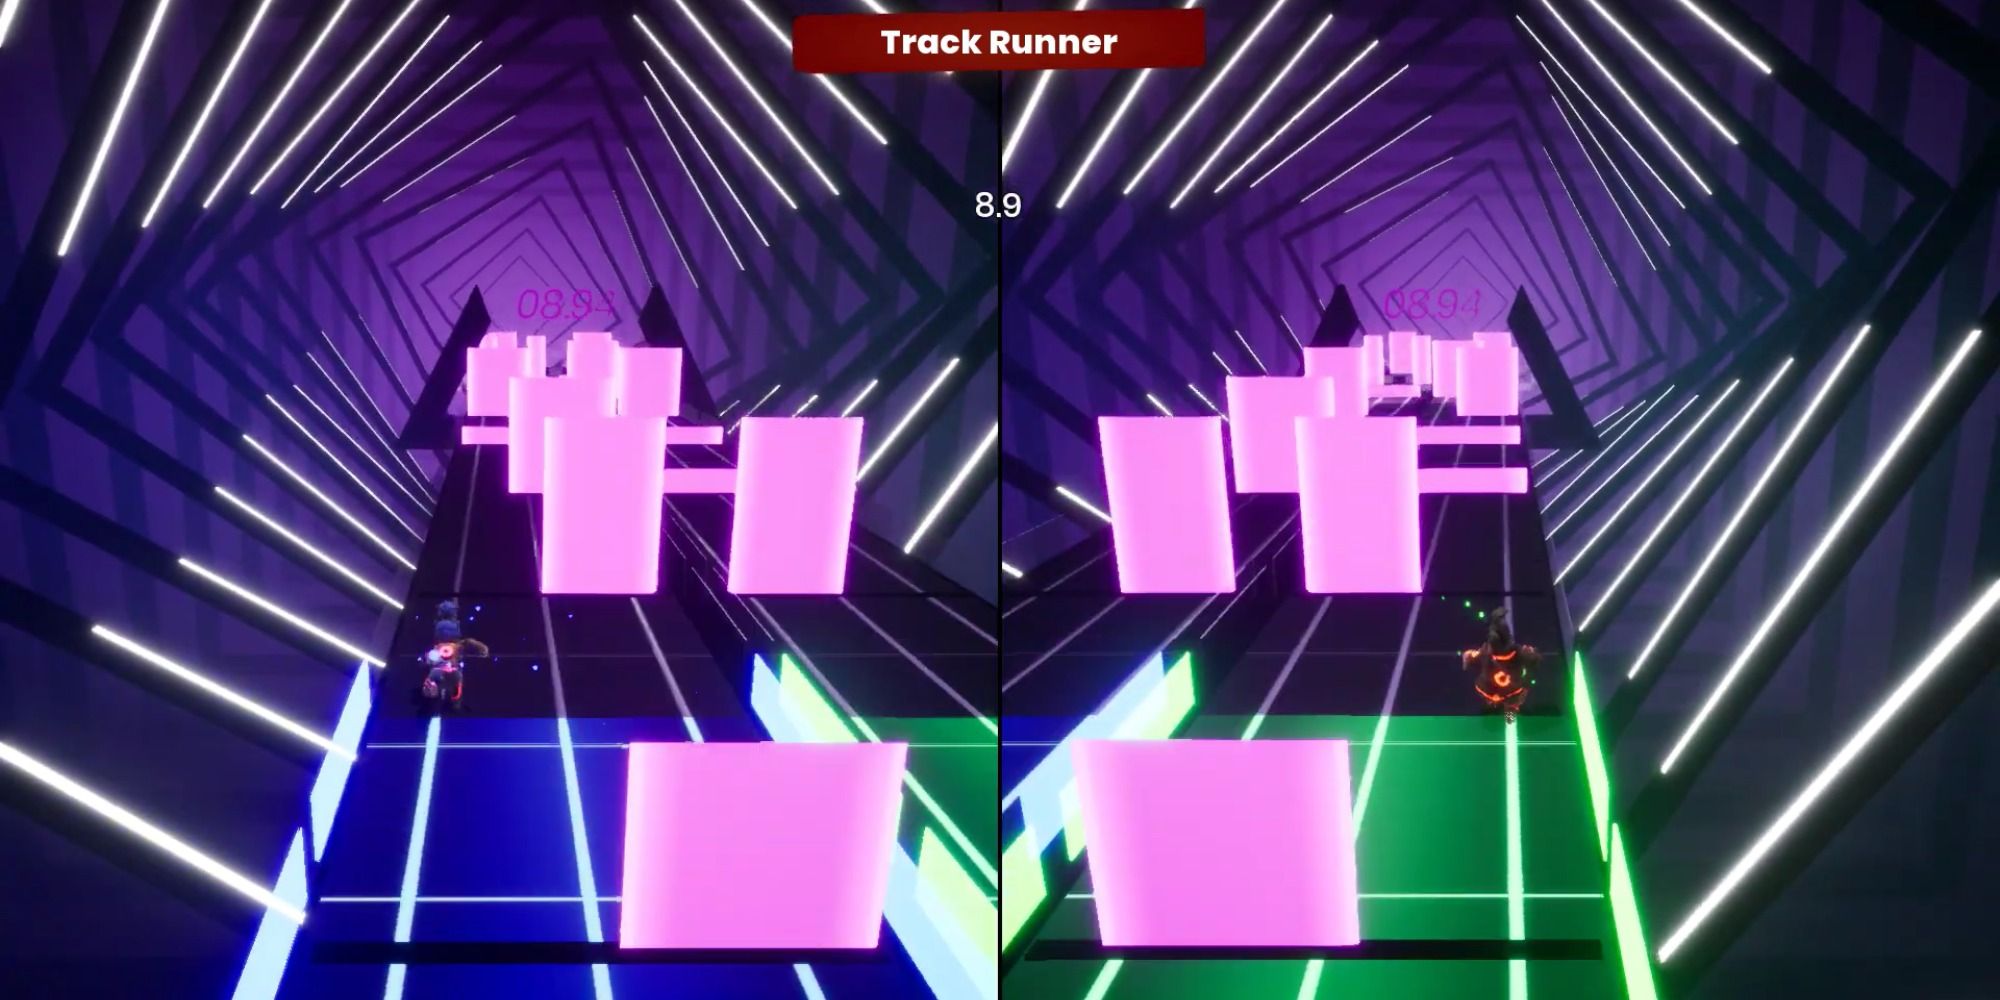 It Takes Two Track Runner minigame with pink obstacles, 8.9 seconds left